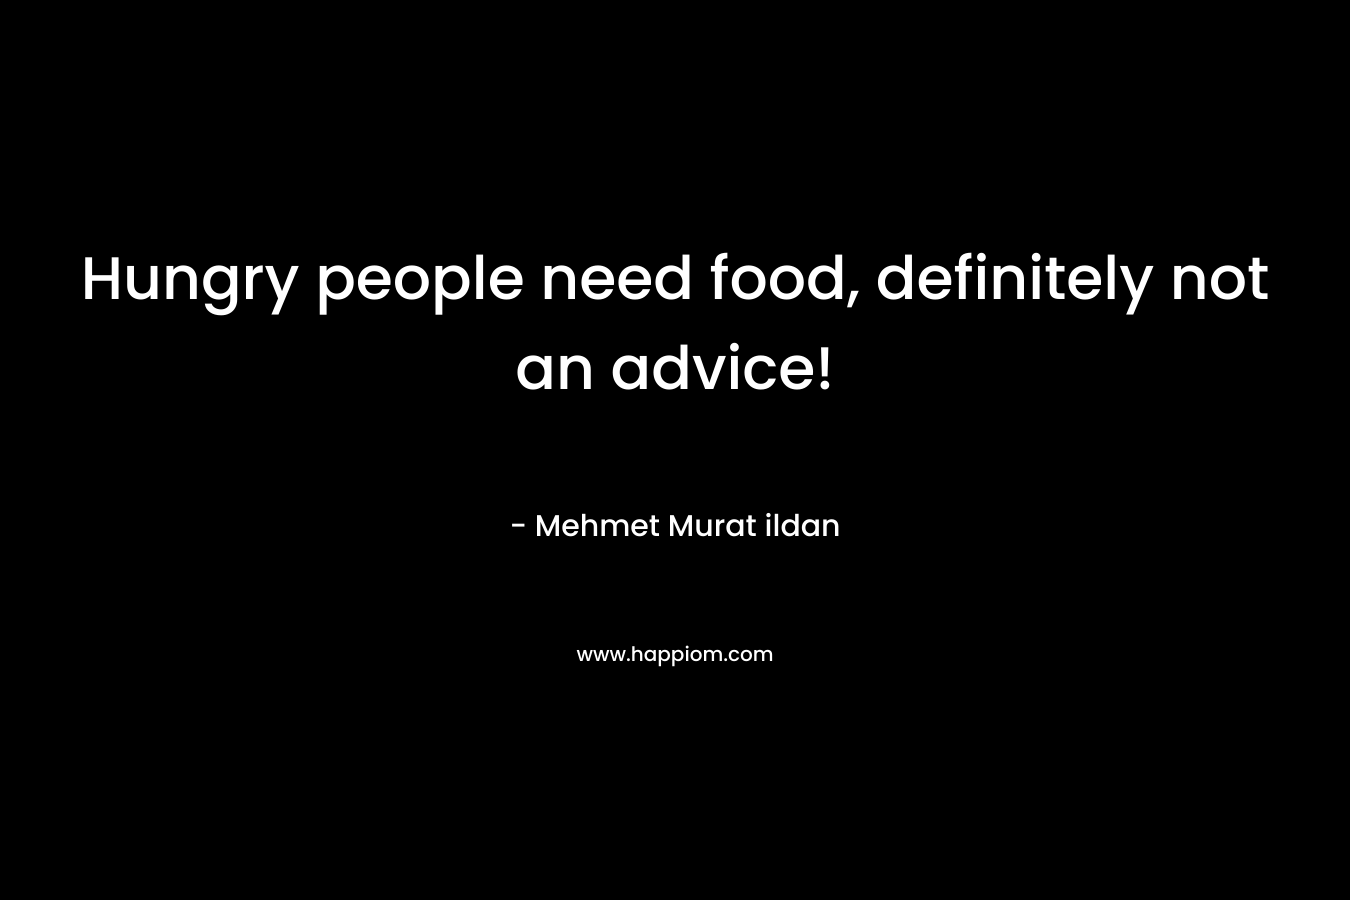 Hungry people need food, definitely not an advice!